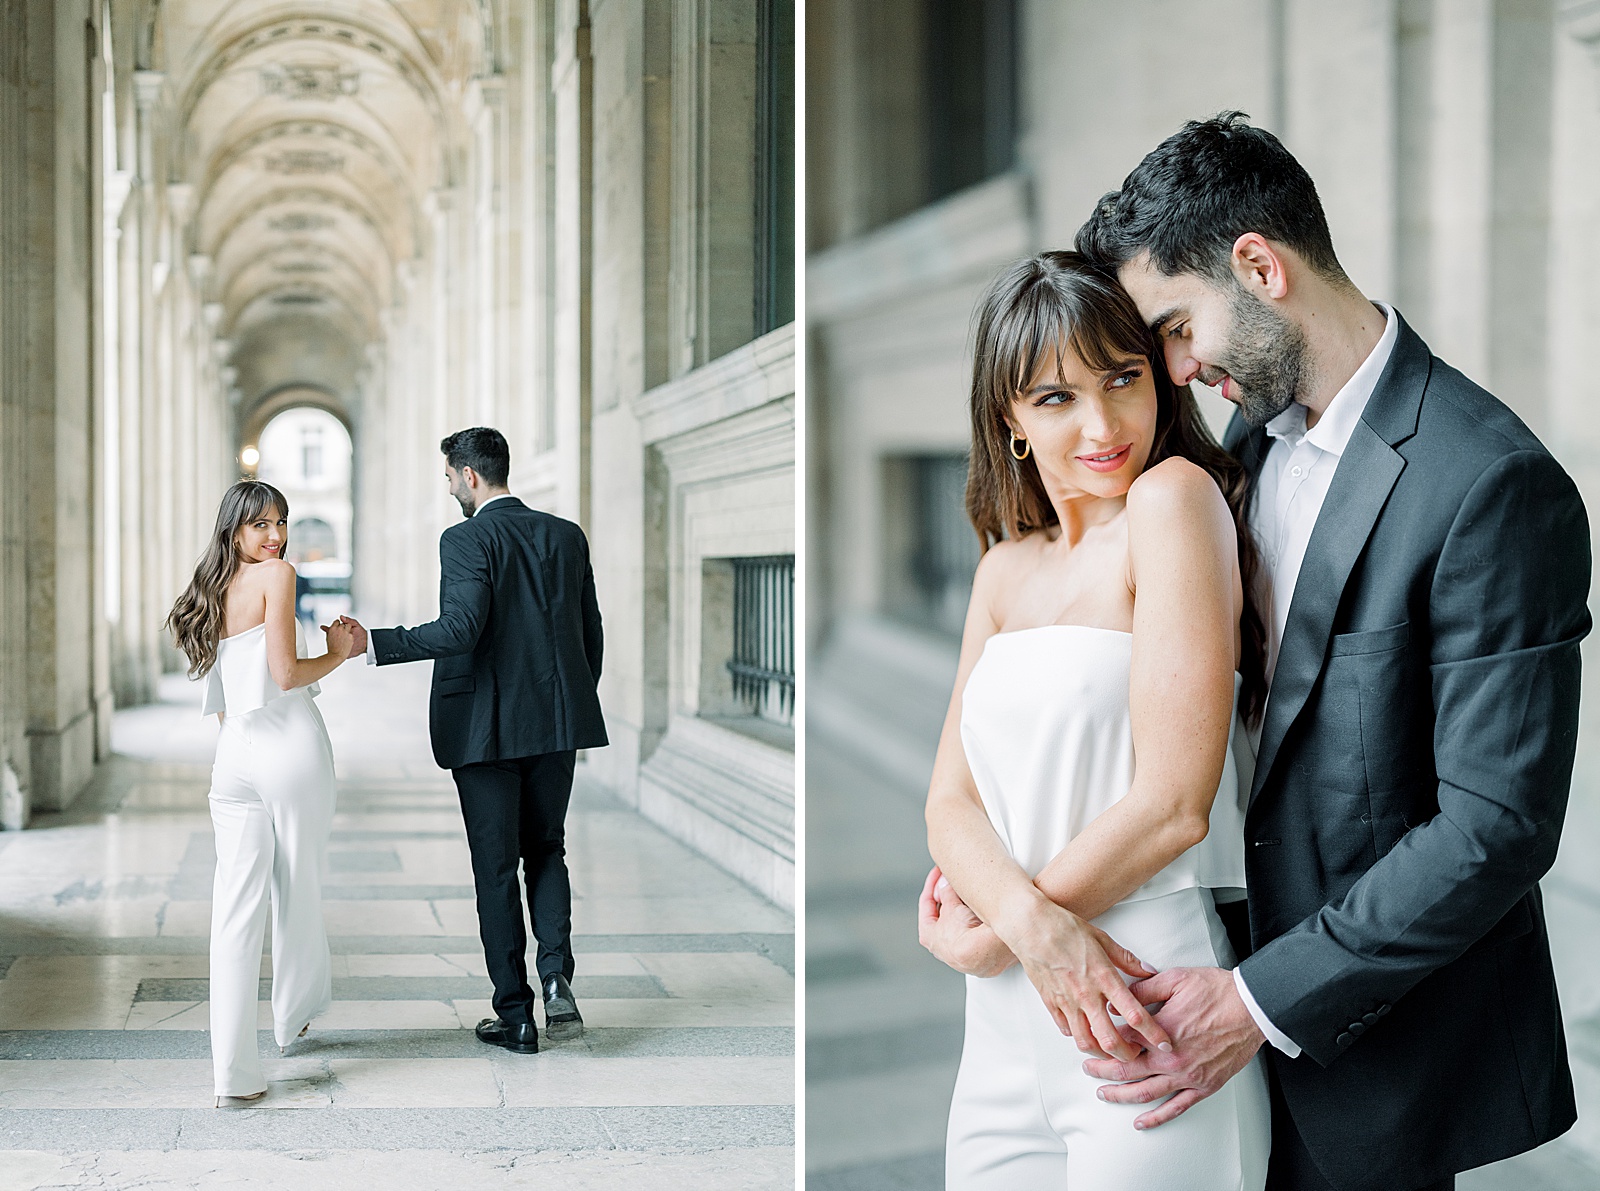 Left Image: A couple walks holding hands through one of the covered outdoor hallways of the Louvre Right image: A couple snuggles up in the same hallway